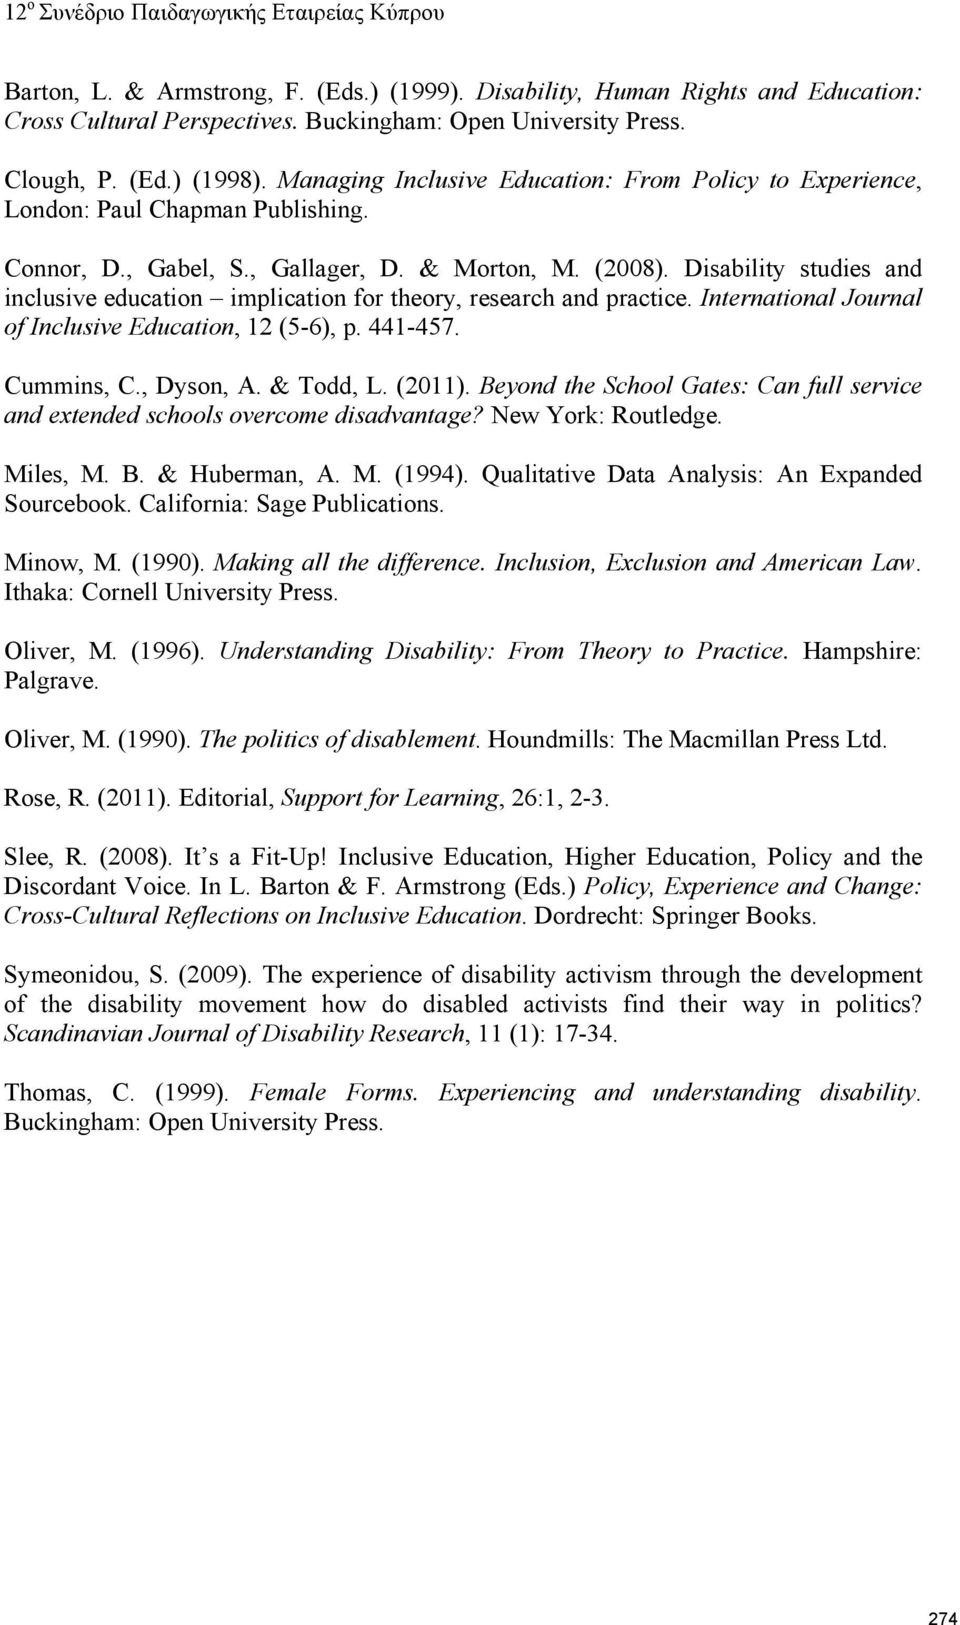 Disability studies and inclusive education implication for theory, research and practice. International Journal of Inclusive Education, 12 (5-6), p. 441-457. Cummins, C., Dyson, A. & Todd, L. (2011).